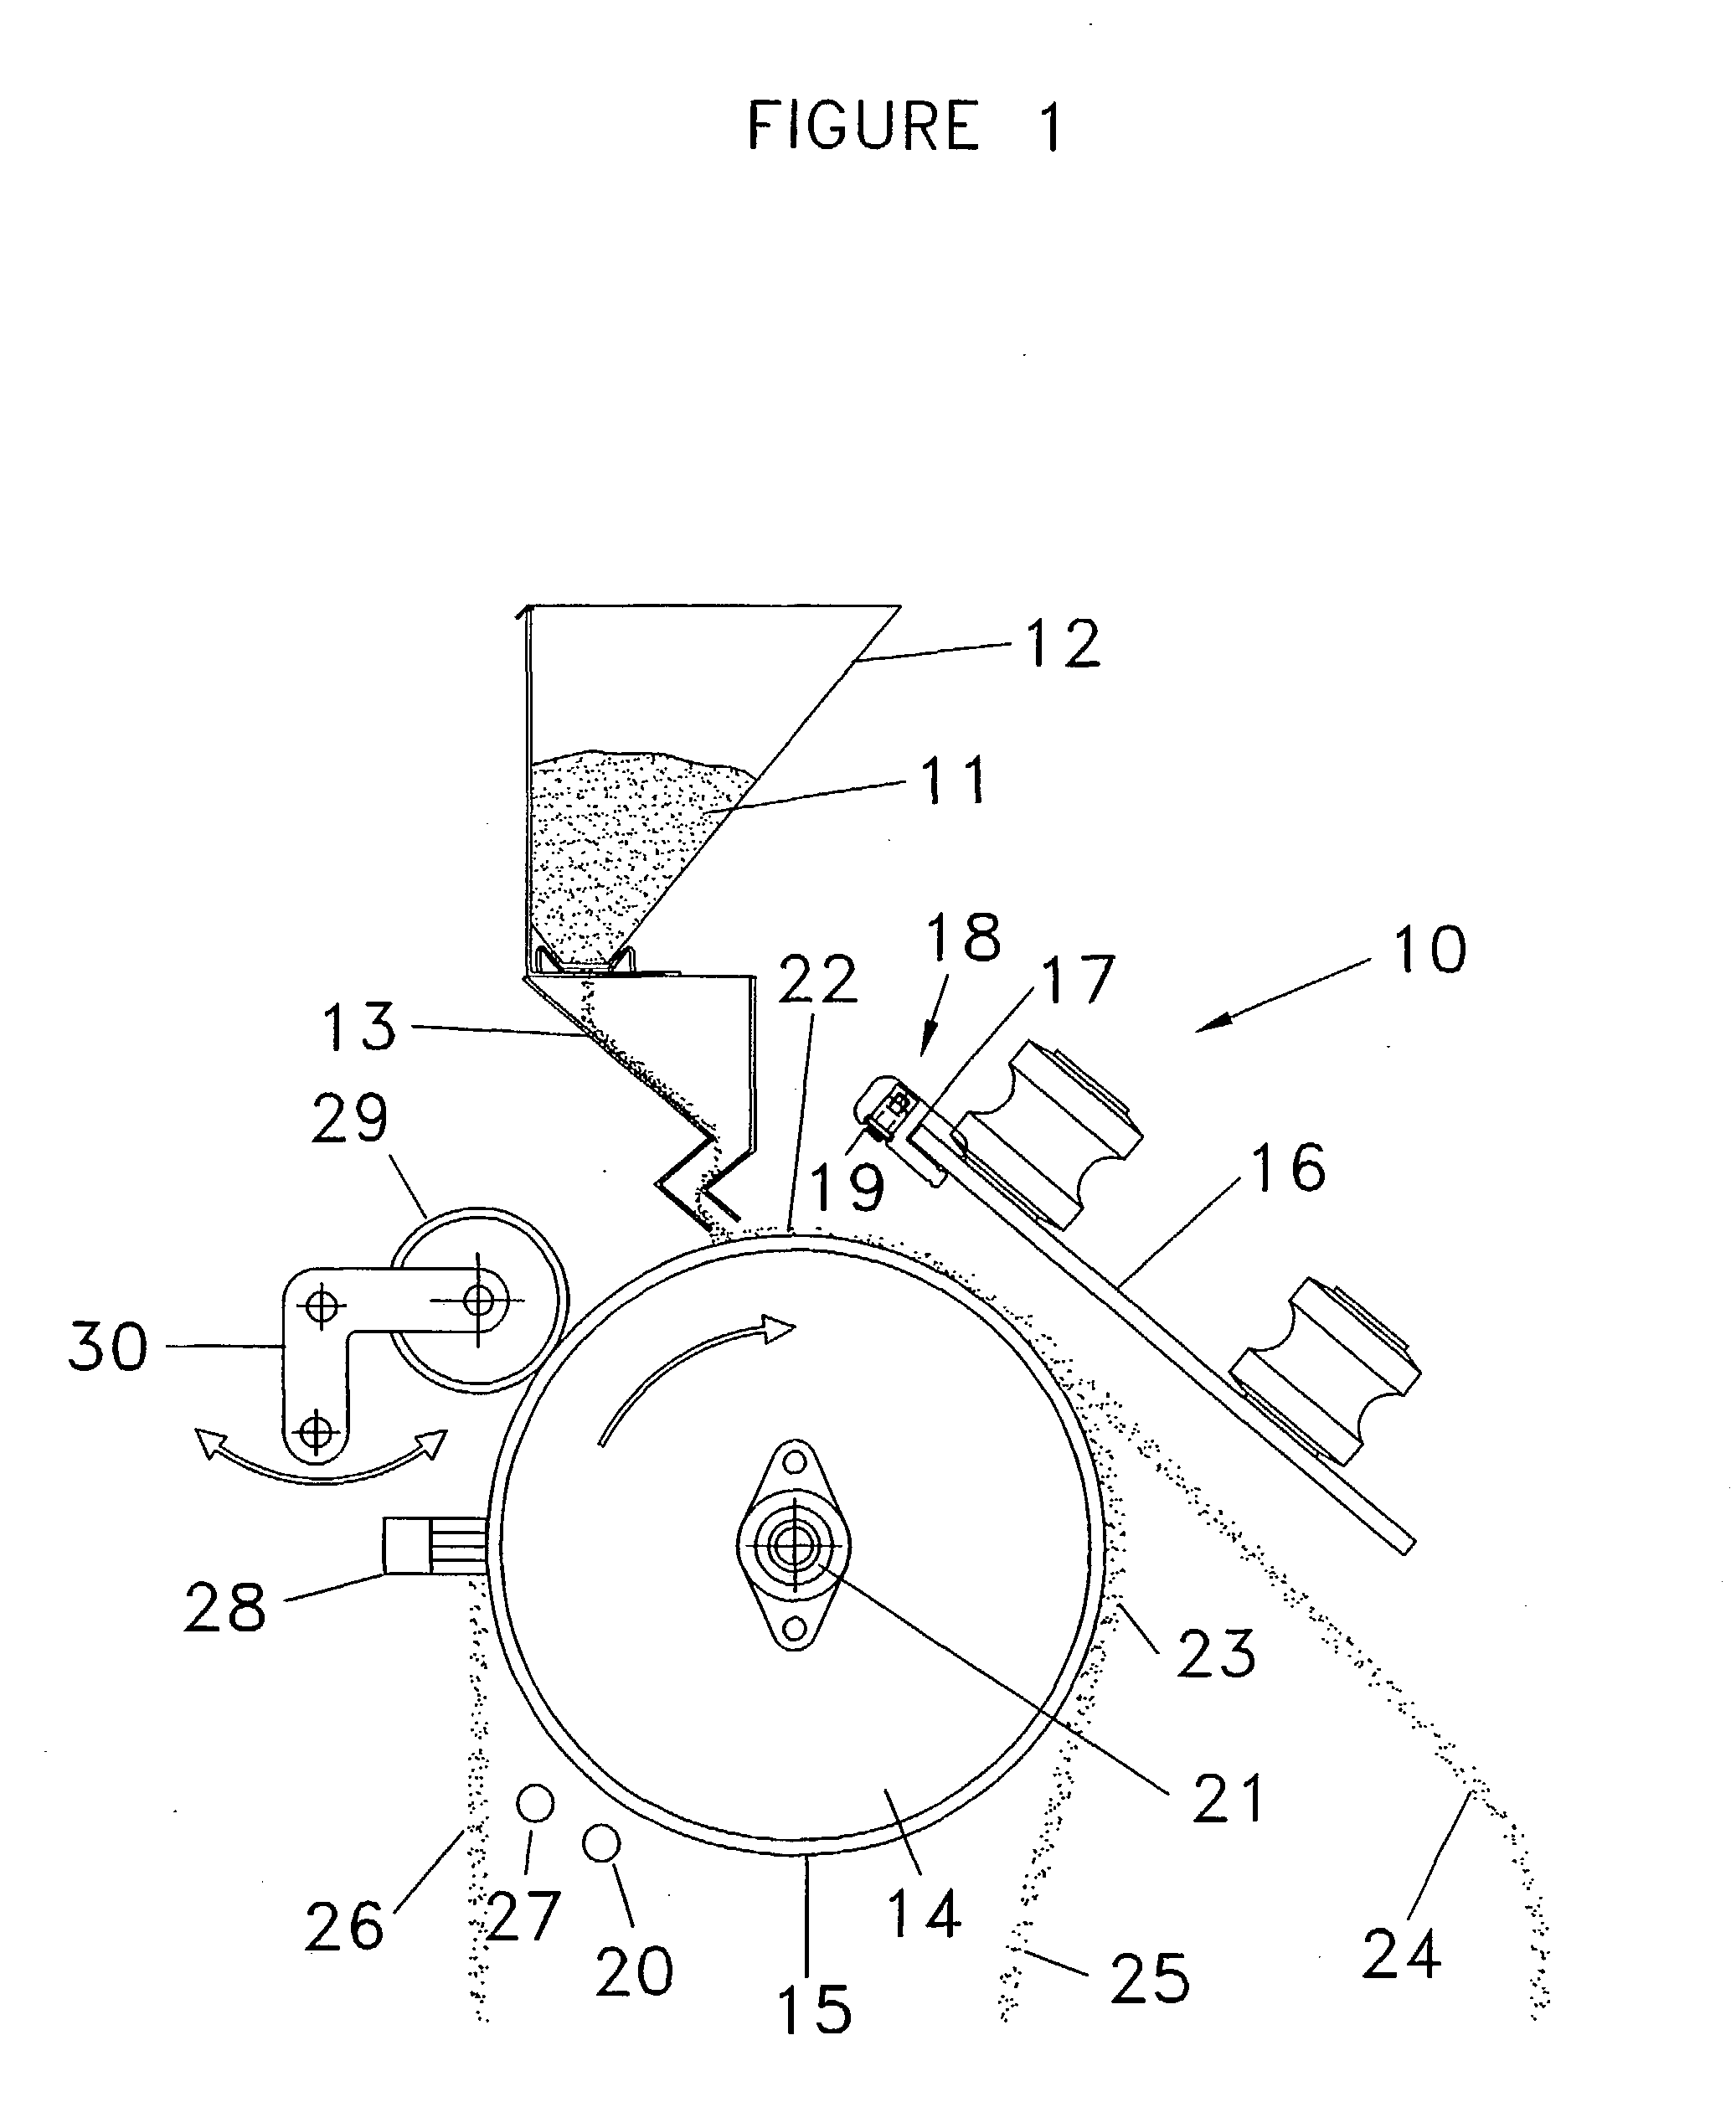 Apparatus for the electrostatic separation of particulate mixtures